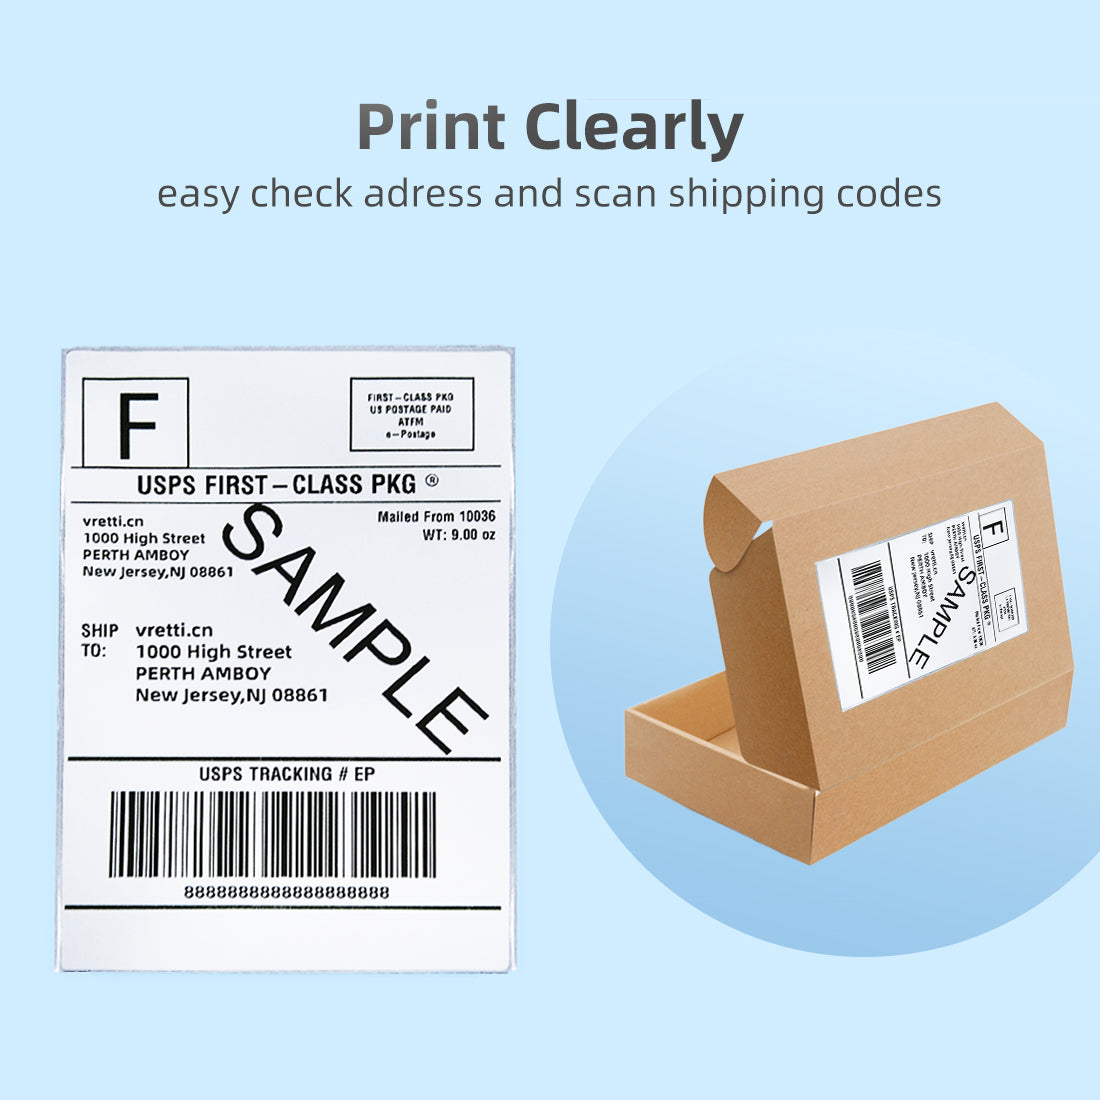 4x6 Direct Thermal Stack Labels (500 Labels Per Pack)